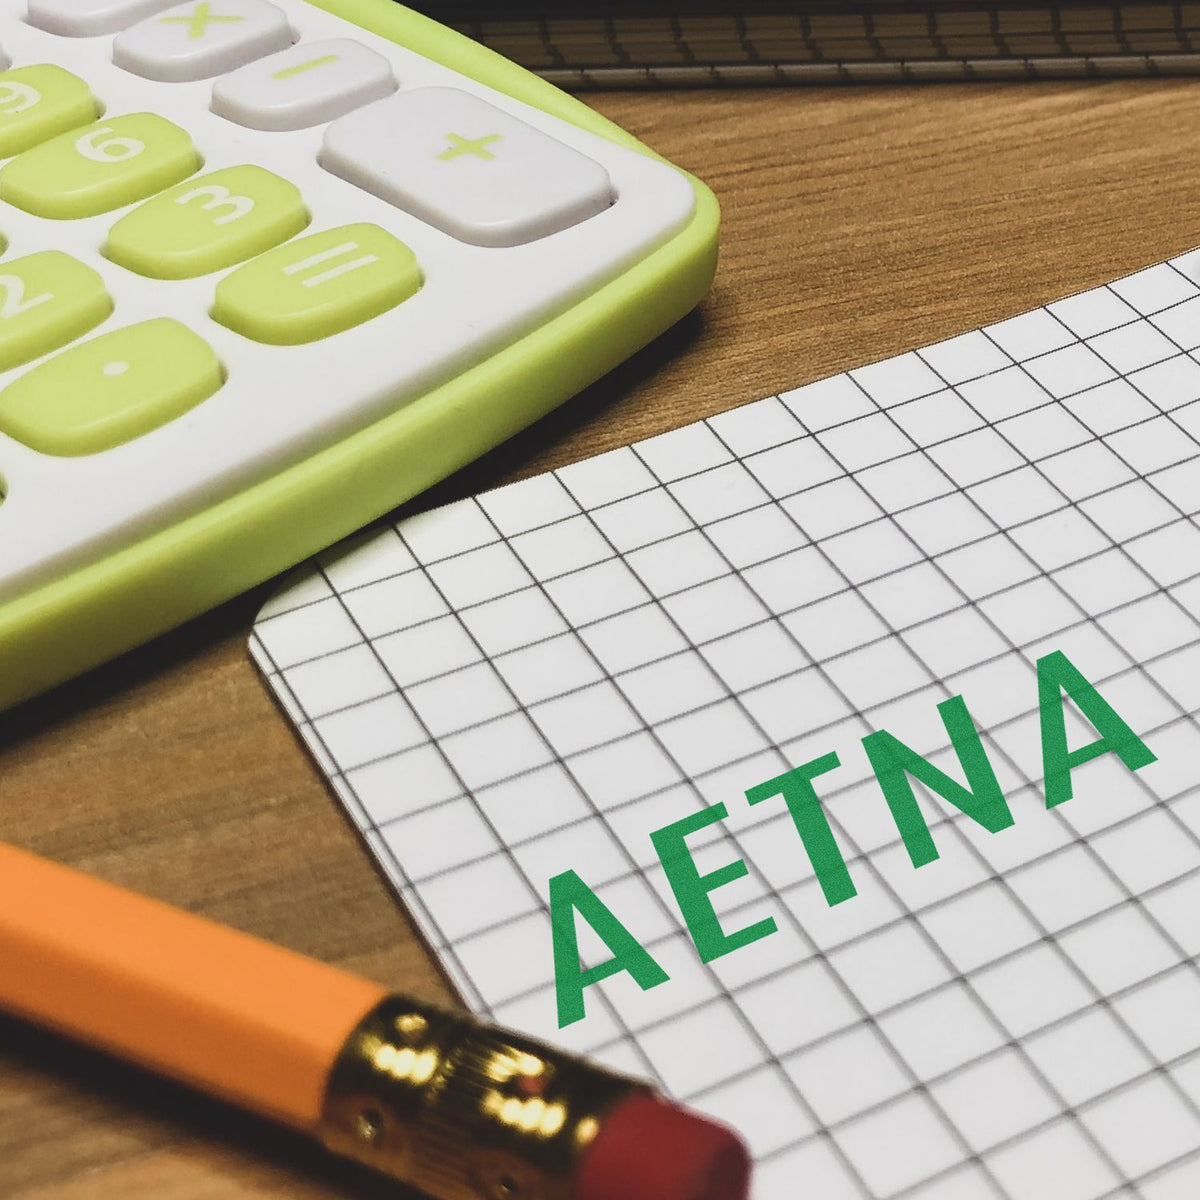 Large Aetna Rubber Stamp In Use